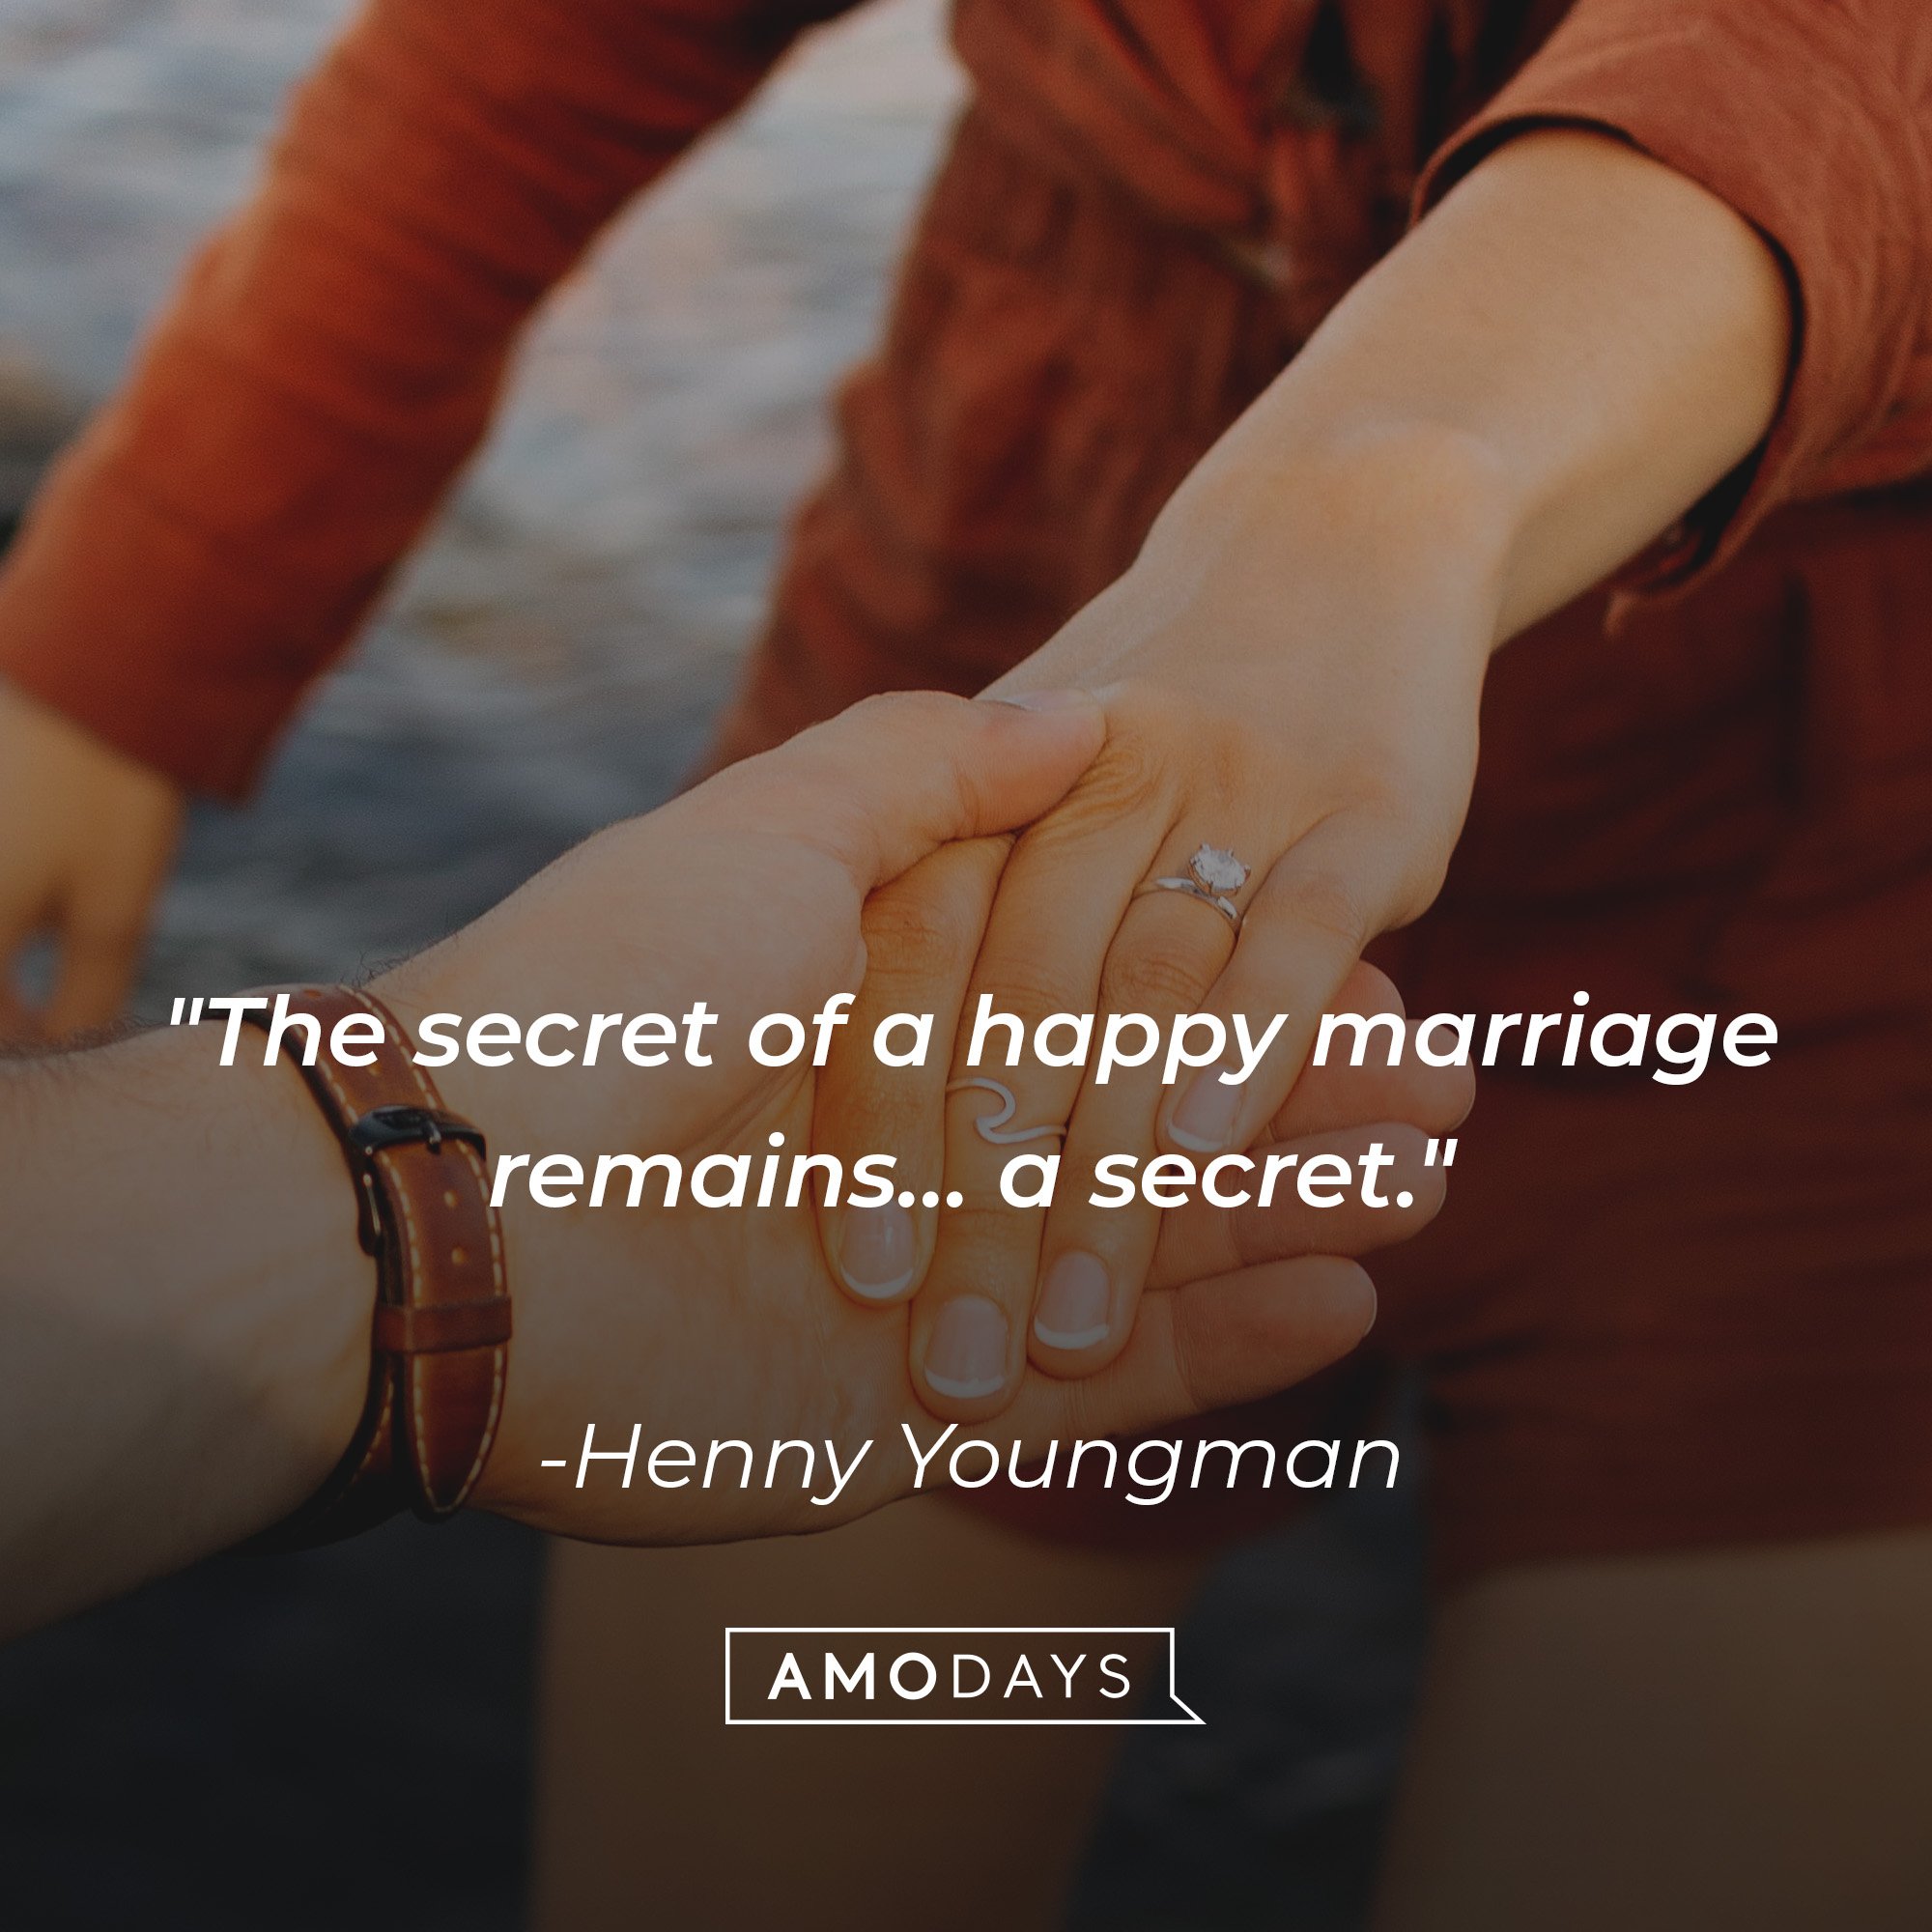 Henny Youngman's quote: "The secret of a happy marriage remains… a secret."| Image: AmoDays